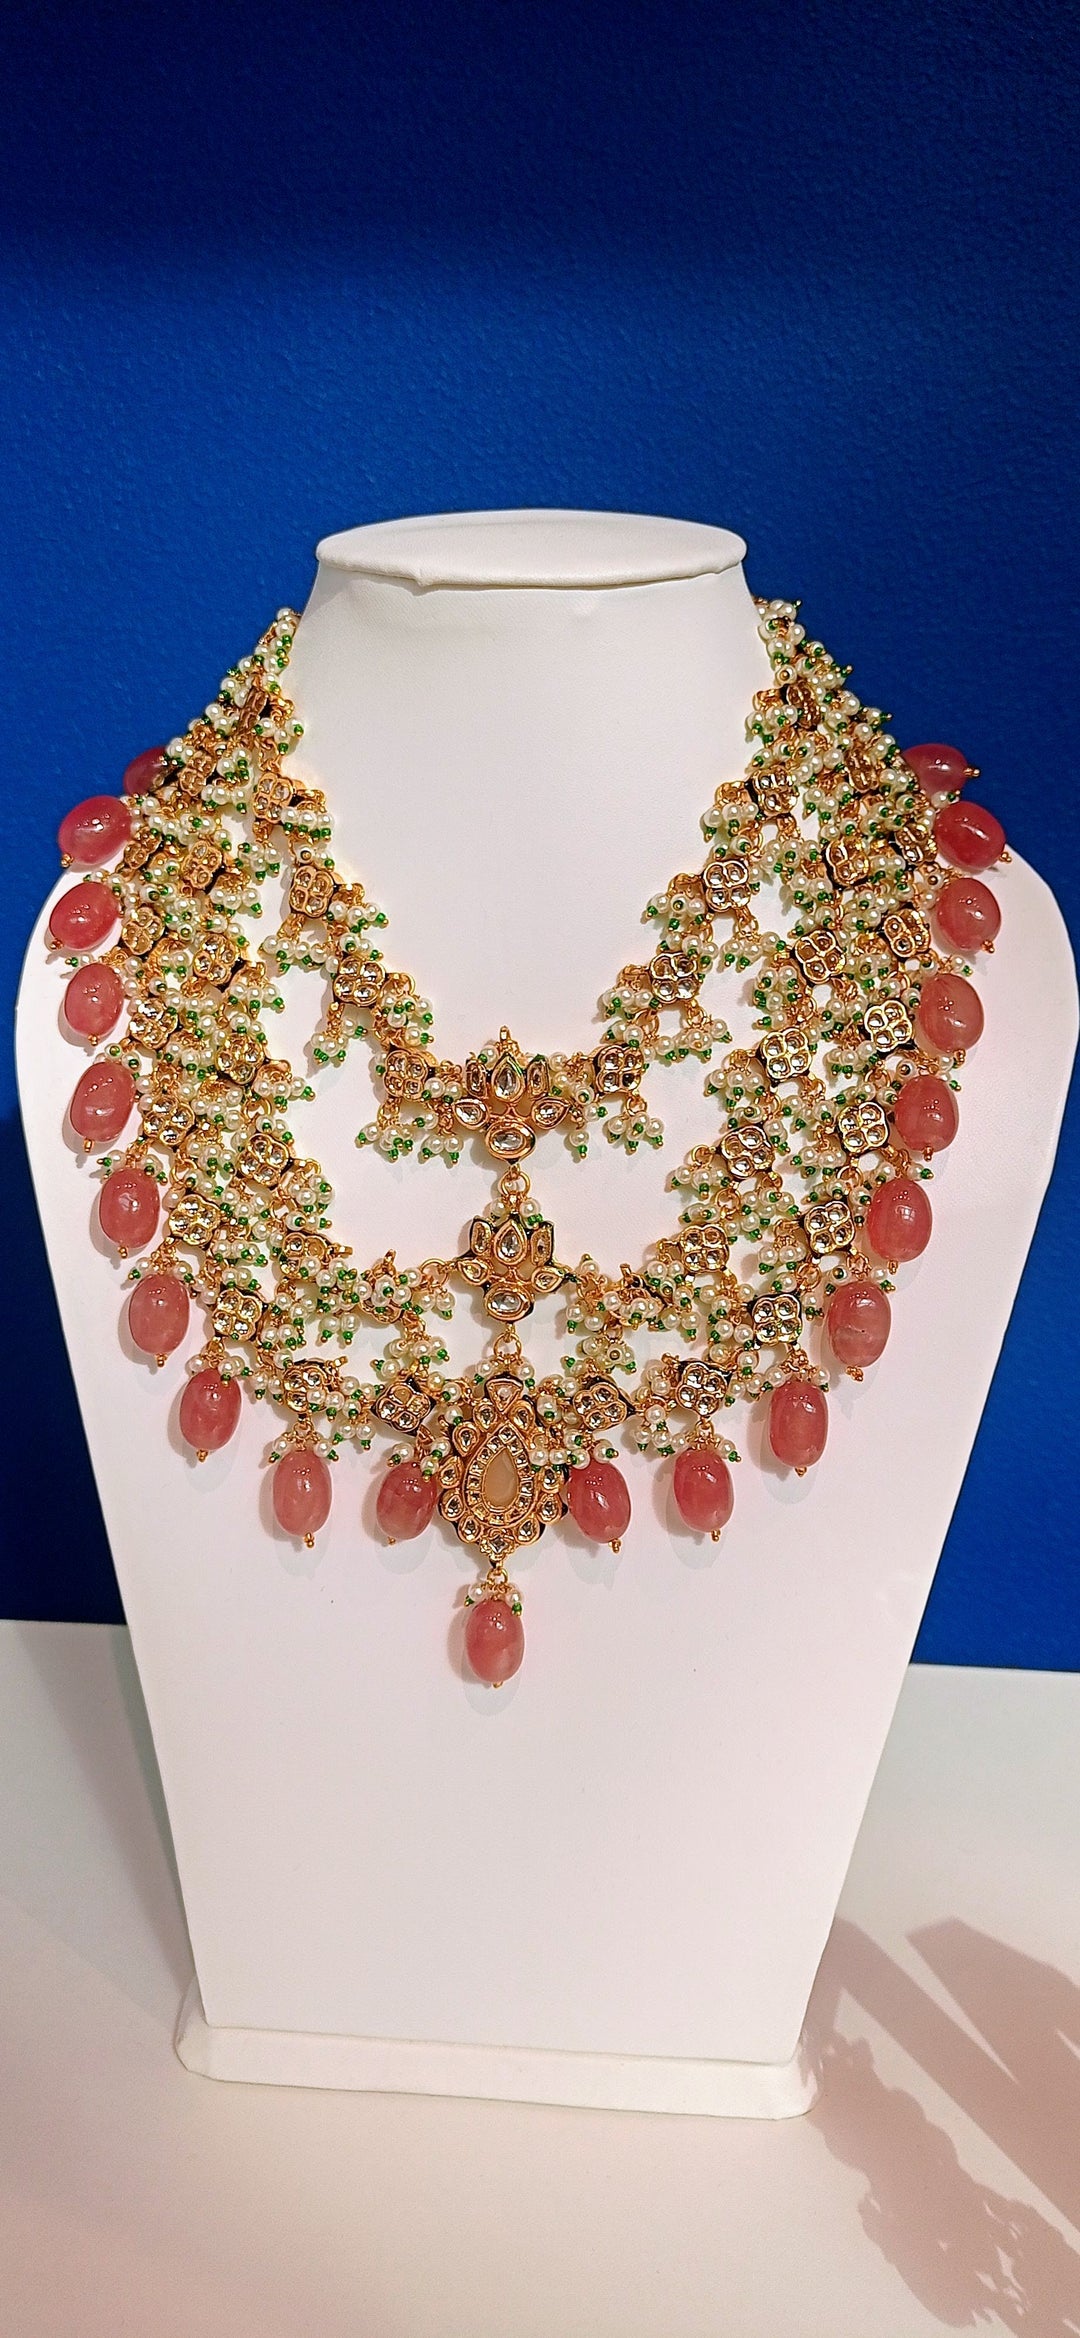 As seen on Jyoti Dave | Influencer Fave Hera Rose Kundan Necklace and Earrings Set